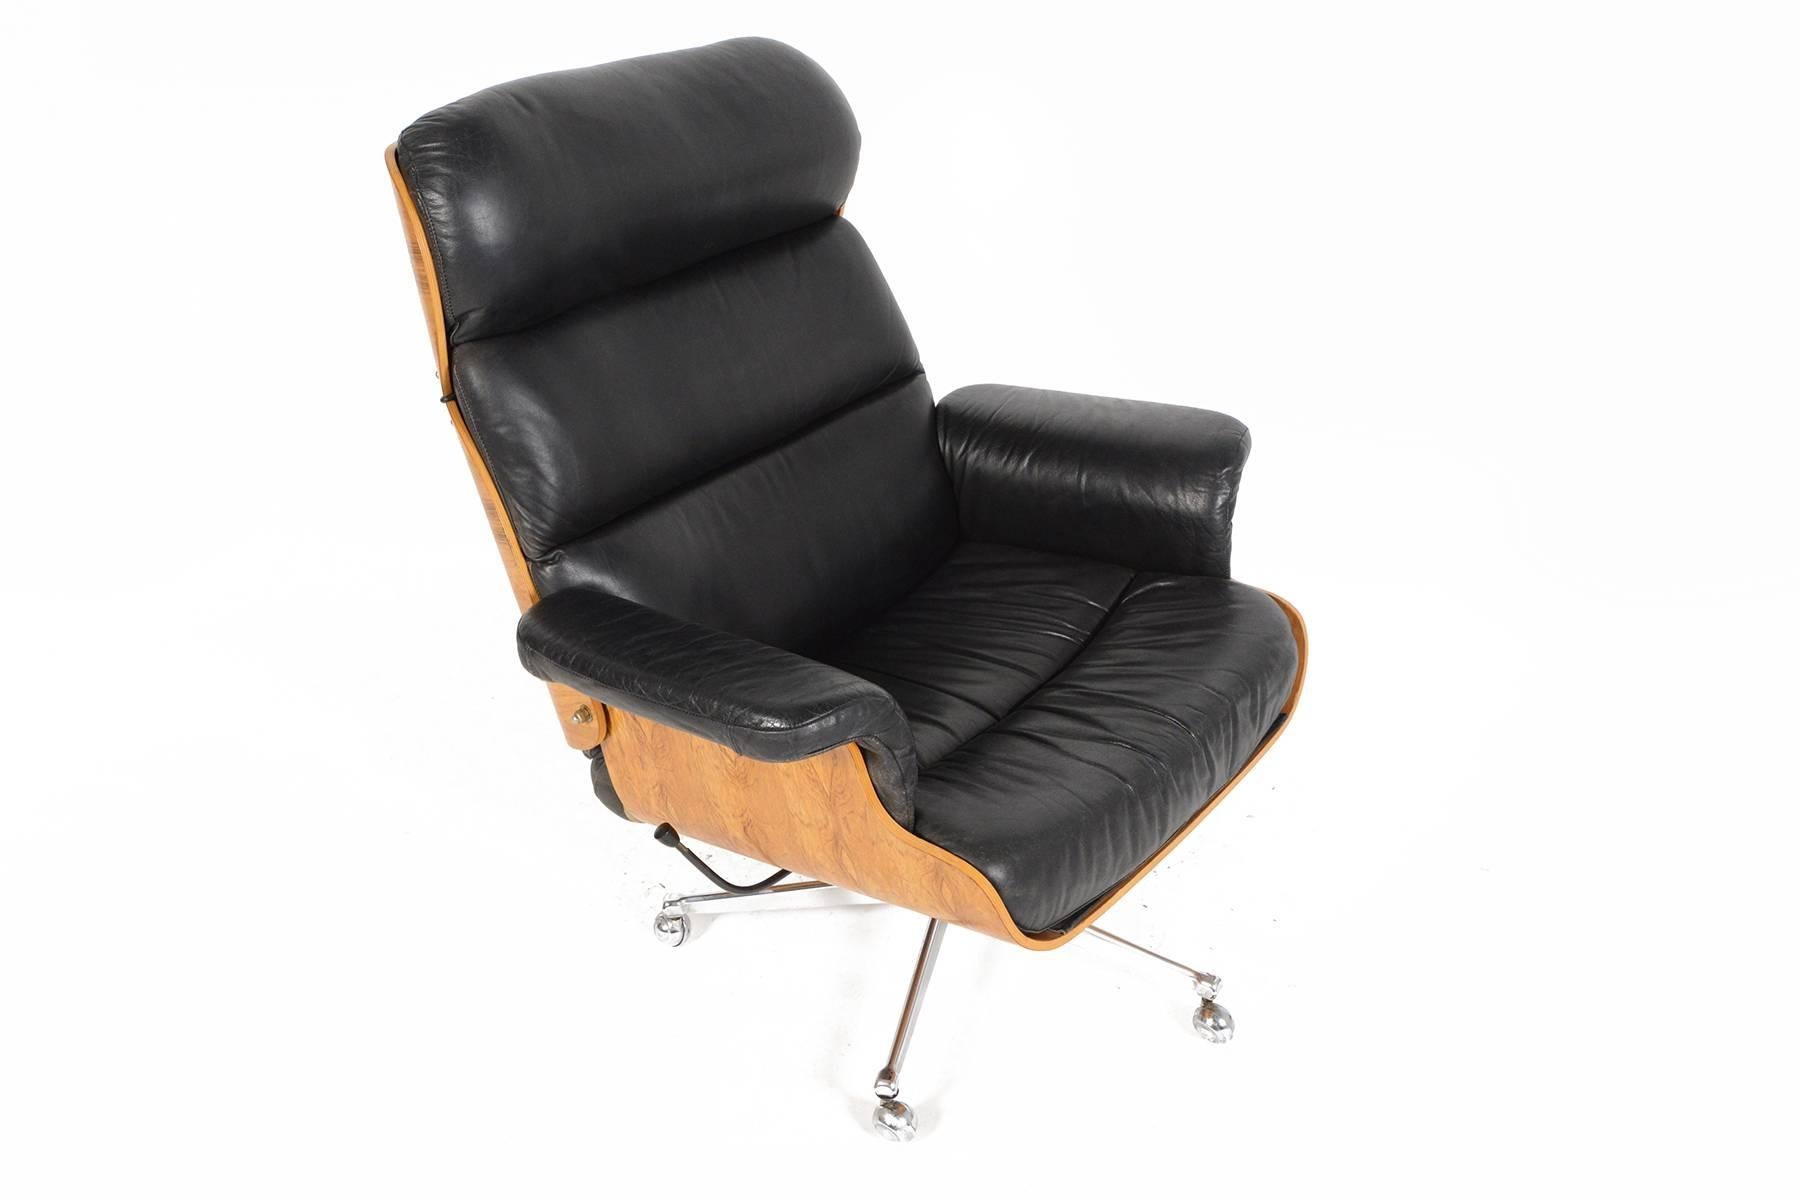 Designed by Martin Stoll for Giroflex of Switzerland, this gorgeous recliner offers the Classic Silhouette of an Eames chair but with a Scandinavian twist! Large panels of bent ply are veneered in stunning sun kissed Brazilian rosewood. Patinated